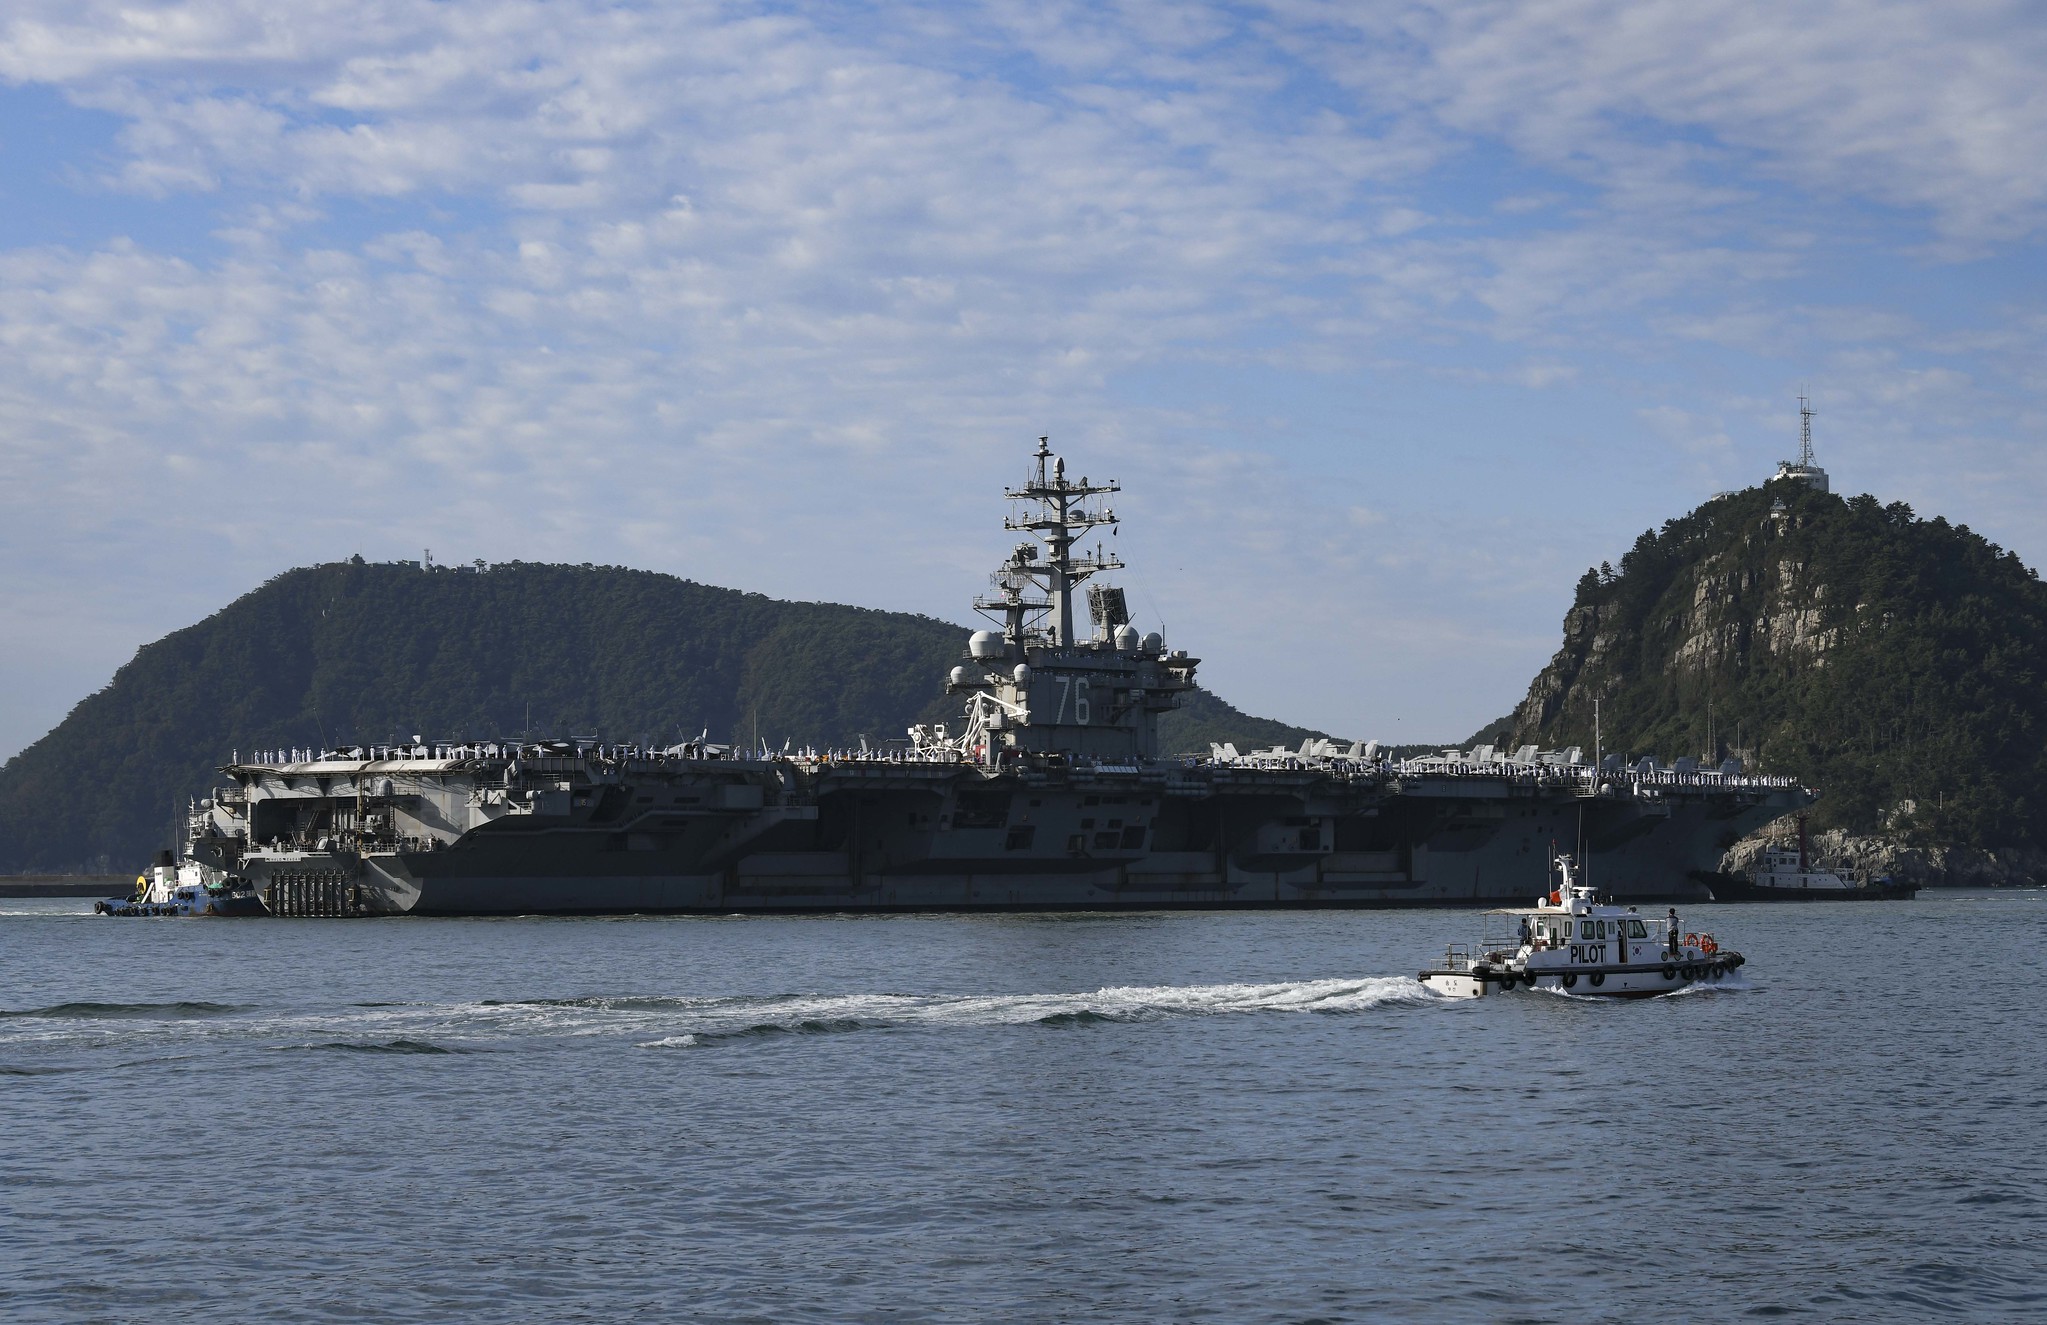 BUSAN, Republic of Korea (Sept. 23, 2022) Tugboats maneuver the Navy’s only forward-deployed aircraft carrier USS Ronald Reagan (CVN 76) to moor in Busan, Republic of Korea. (Source: U.S. Navy photo by Mass Communication Specialist 2nd Class Leon Wong via Flicker)